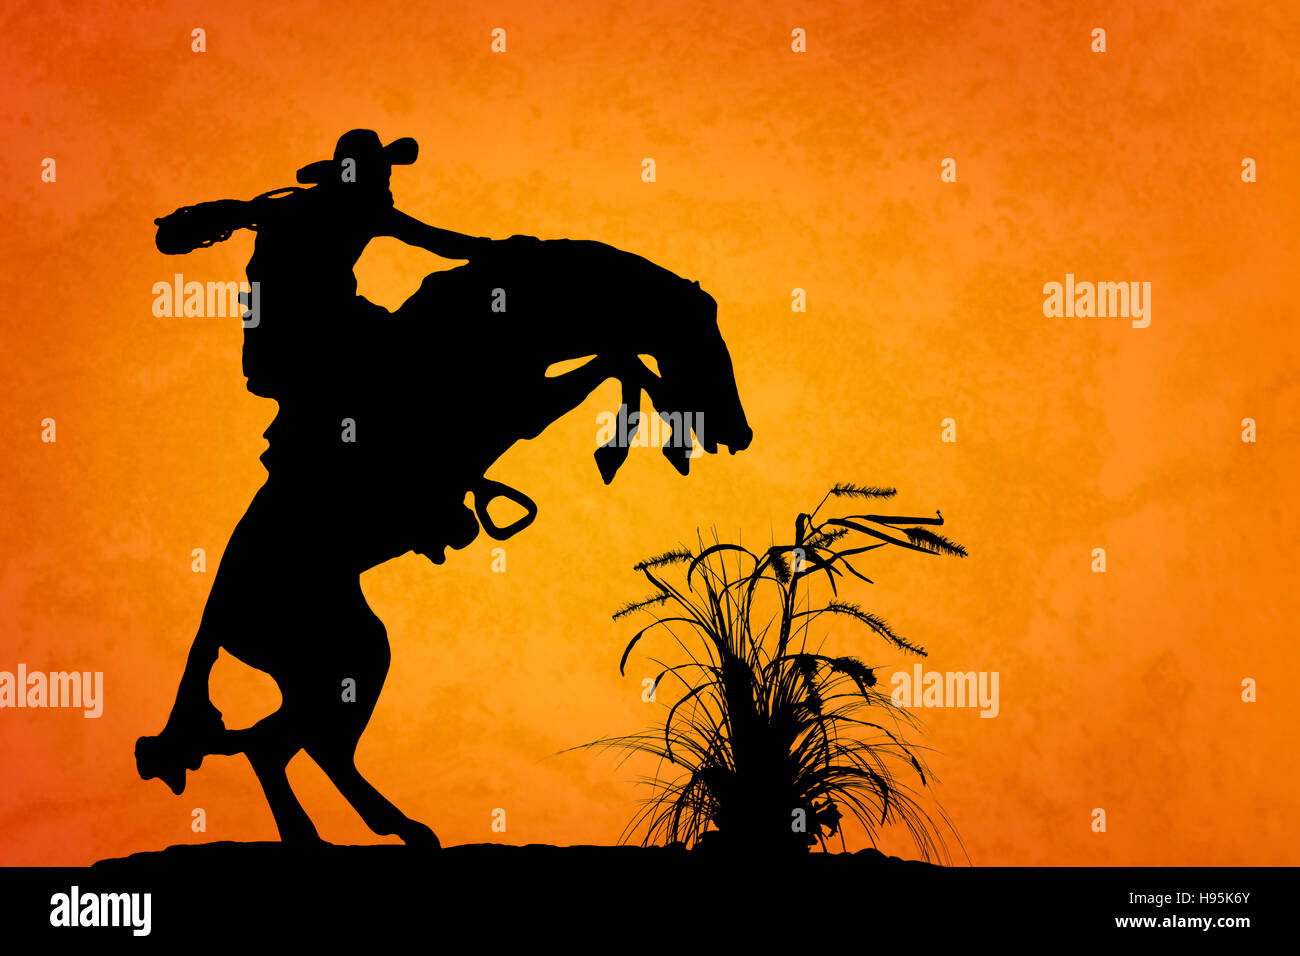 Silhouette of cowboy reigning bucking bronco spooked by something in the nearby sagebrush. Sunset orange textured background. Stock Photo